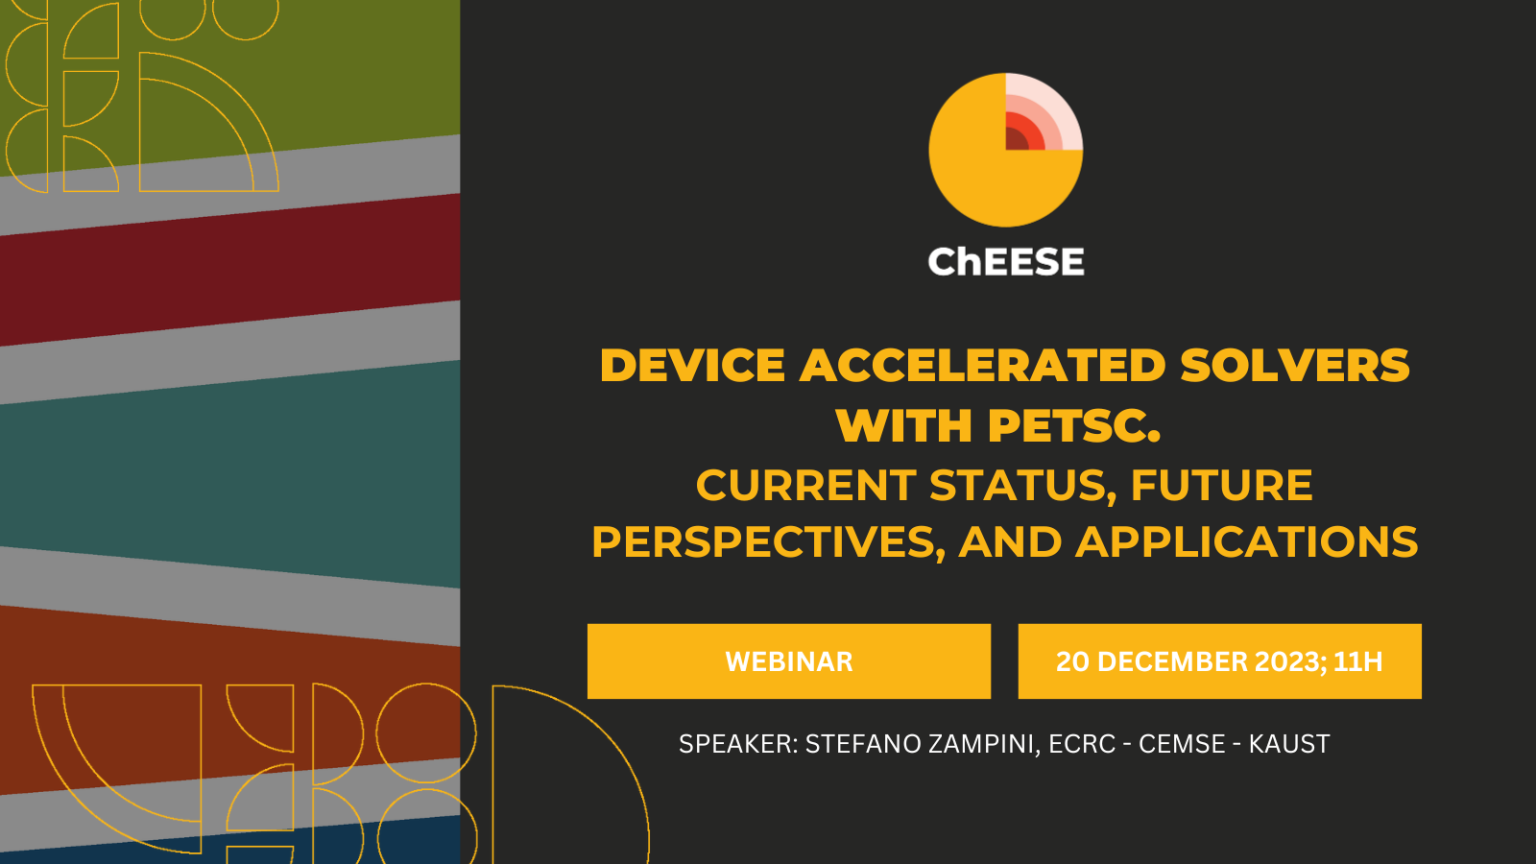 Уебинар „Device accelerated solvers with PETSc. Current Status, future perspectives, and applications“, 20.12.2023г, 11:00CET, онлайн, организатор ЦВП ChEESE